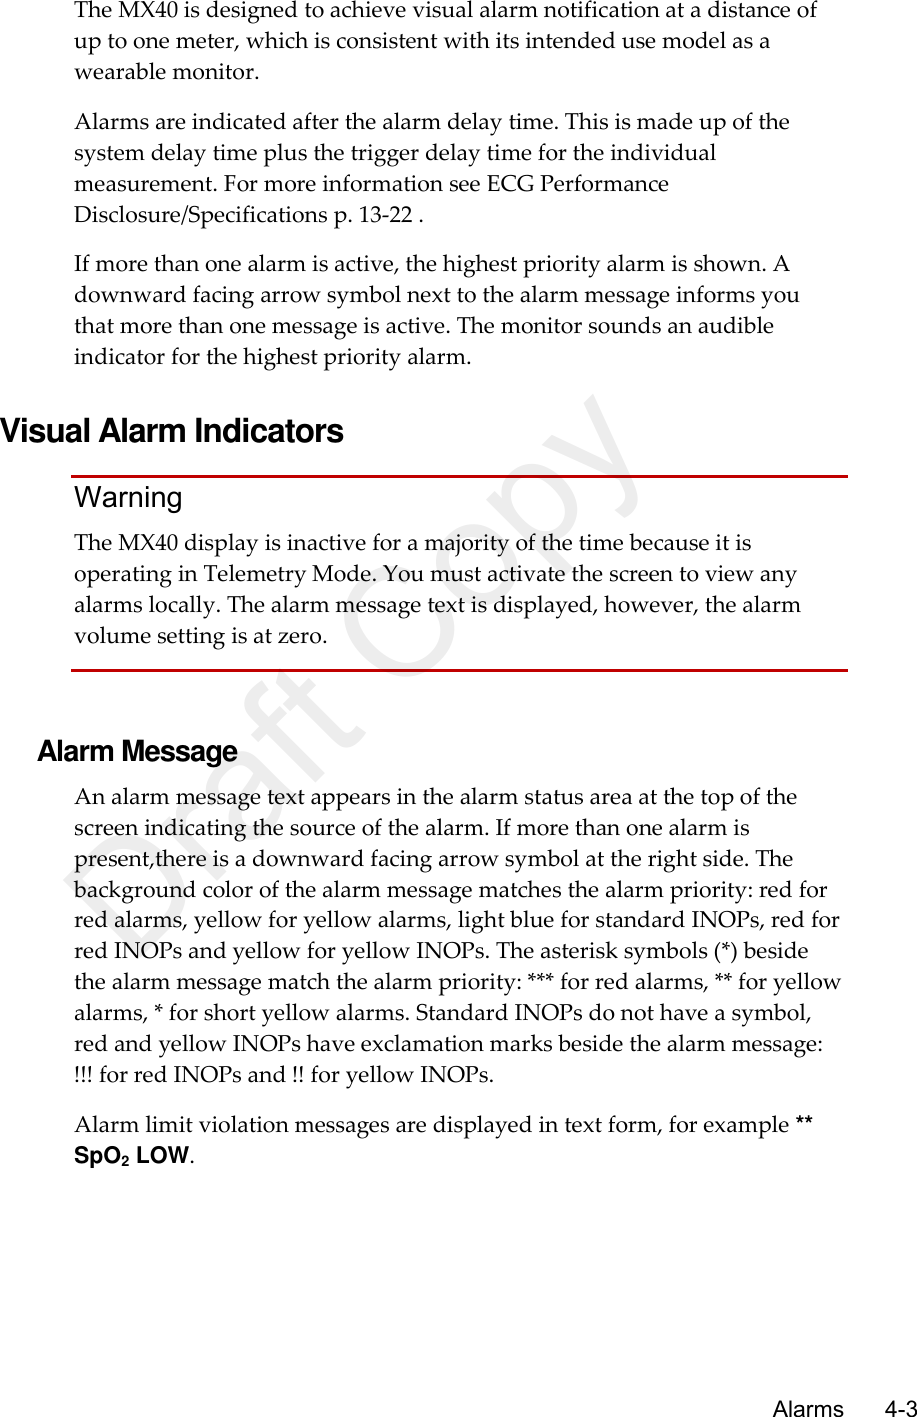      Alarms       4-3 The MX40 is designed to achieve visual alarm notification at a distance of up to one meter, which is consistent with its intended use model as a wearable monitor. Alarms are indicated after the alarm delay time. This is made up of the system delay time plus the trigger delay time for the individual measurement. For more information see ECG Performance Disclosure/Specifications p. 13-22 . If more than one alarm is active, the highest priority alarm is shown. A downward facing arrow symbol next to the alarm message informs you that more than one message is active. The monitor sounds an audible indicator for the highest priority alarm.    Visual Alarm Indicators Warning The MX40 display is inactive for a majority of the time because it is operating in Telemetry Mode. You must activate the screen to view any alarms locally. The alarm message text is displayed, however, the alarm volume setting is at zero.   Alarm Message An alarm message text appears in the alarm status area at the top of the screen indicating the source of the alarm. If more than one alarm is present,there is a downward facing arrow symbol at the right side. The background color of the alarm message matches the alarm priority: red for red alarms, yellow for yellow alarms, light blue for standard INOPs, red for red INOPs and yellow for yellow INOPs. The asterisk symbols (*) beside the alarm message match the alarm priority: *** for red alarms, ** for yellow alarms, * for short yellow alarms. Standard INOPs do not have a symbol, red and yellow INOPs have exclamation marks beside the alarm message: !!! for red INOPs and !! for yellow INOPs. Alarm limit violation messages are displayed in text form, for example ** SpO2 LOW.  Draft Copy